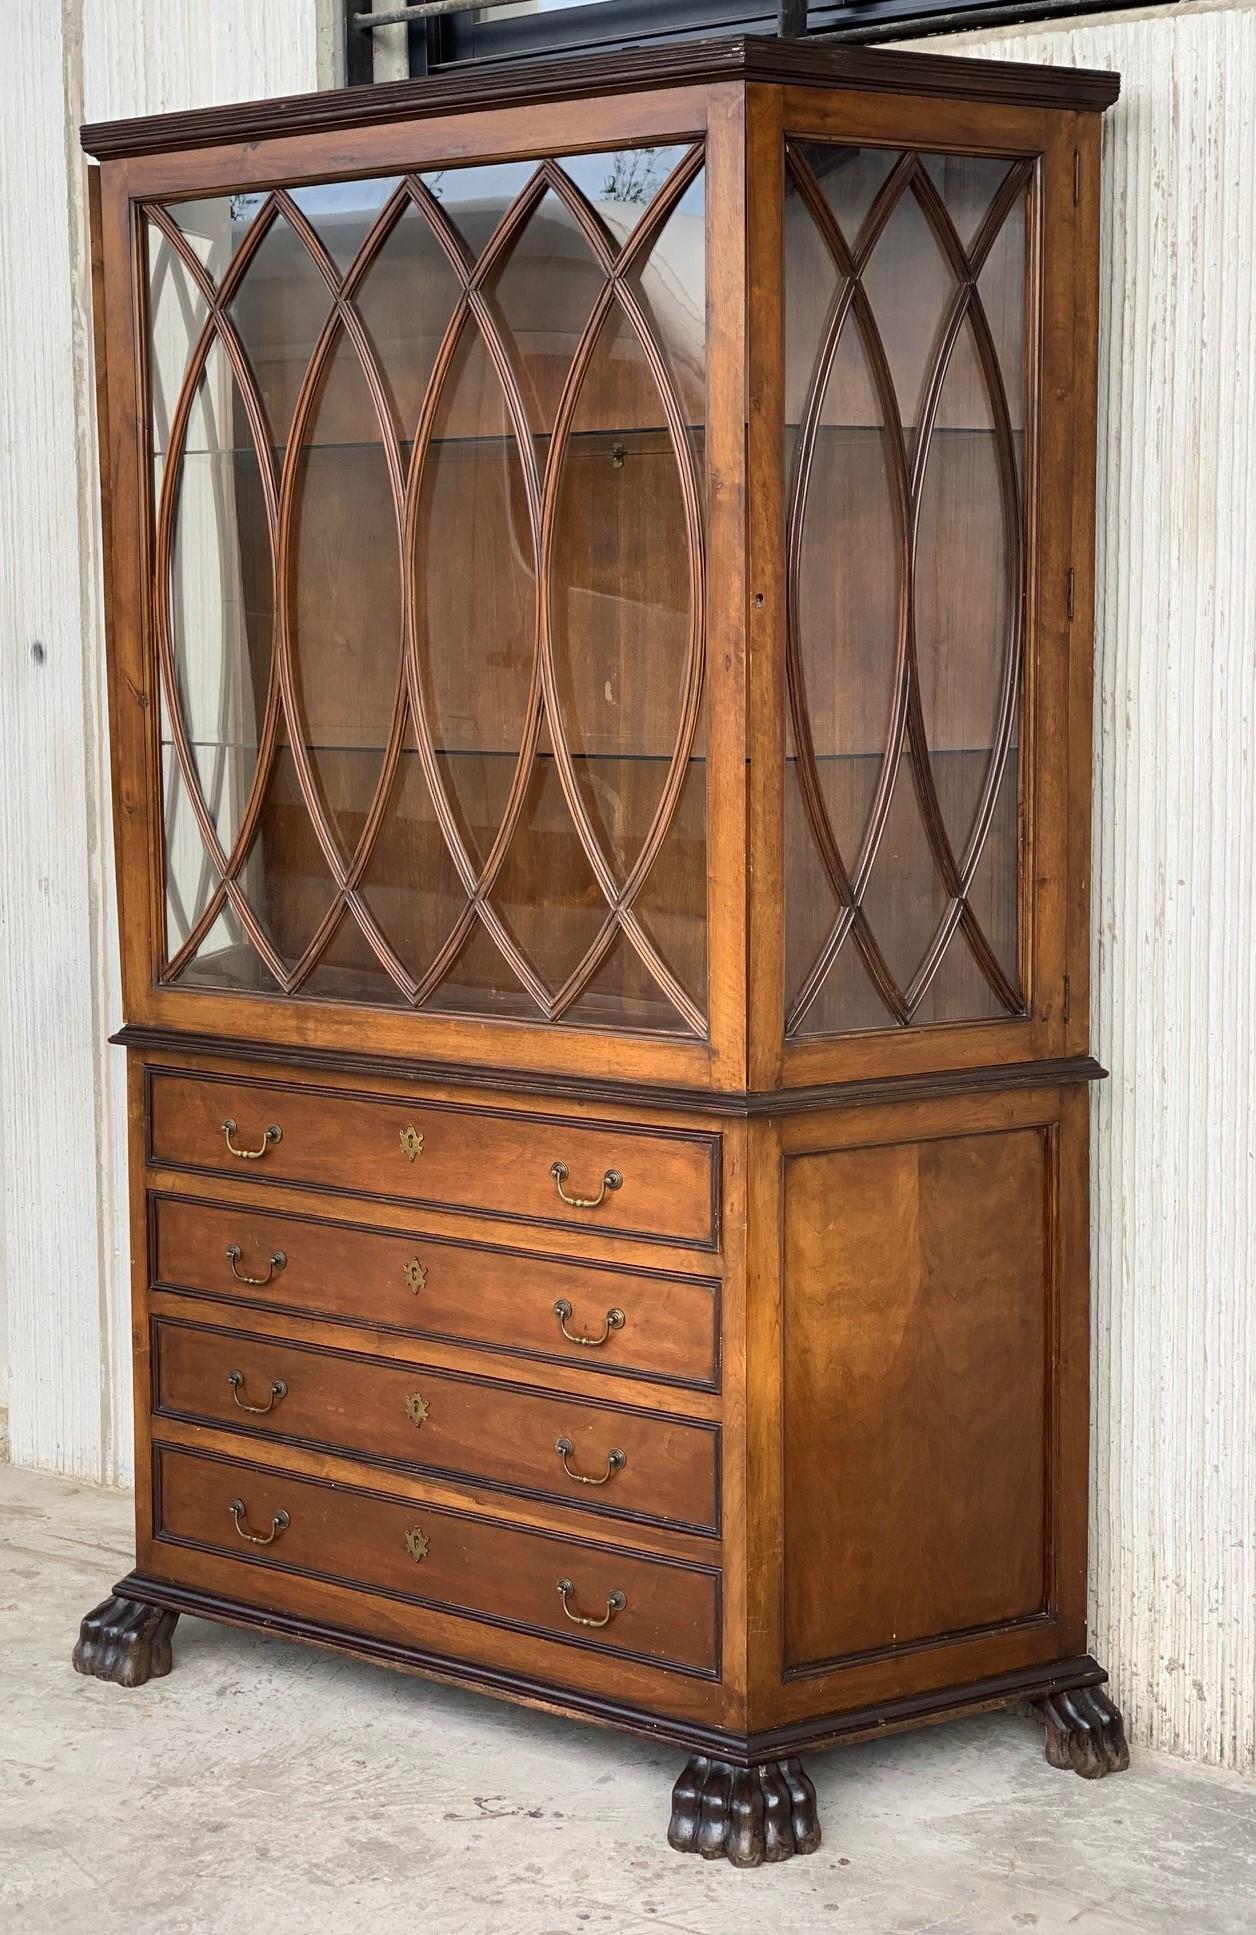 French Art Nouveau Fruitwood Wooden Showcase Vitrine with Four Drawers In Good Condition For Sale In Miami, FL